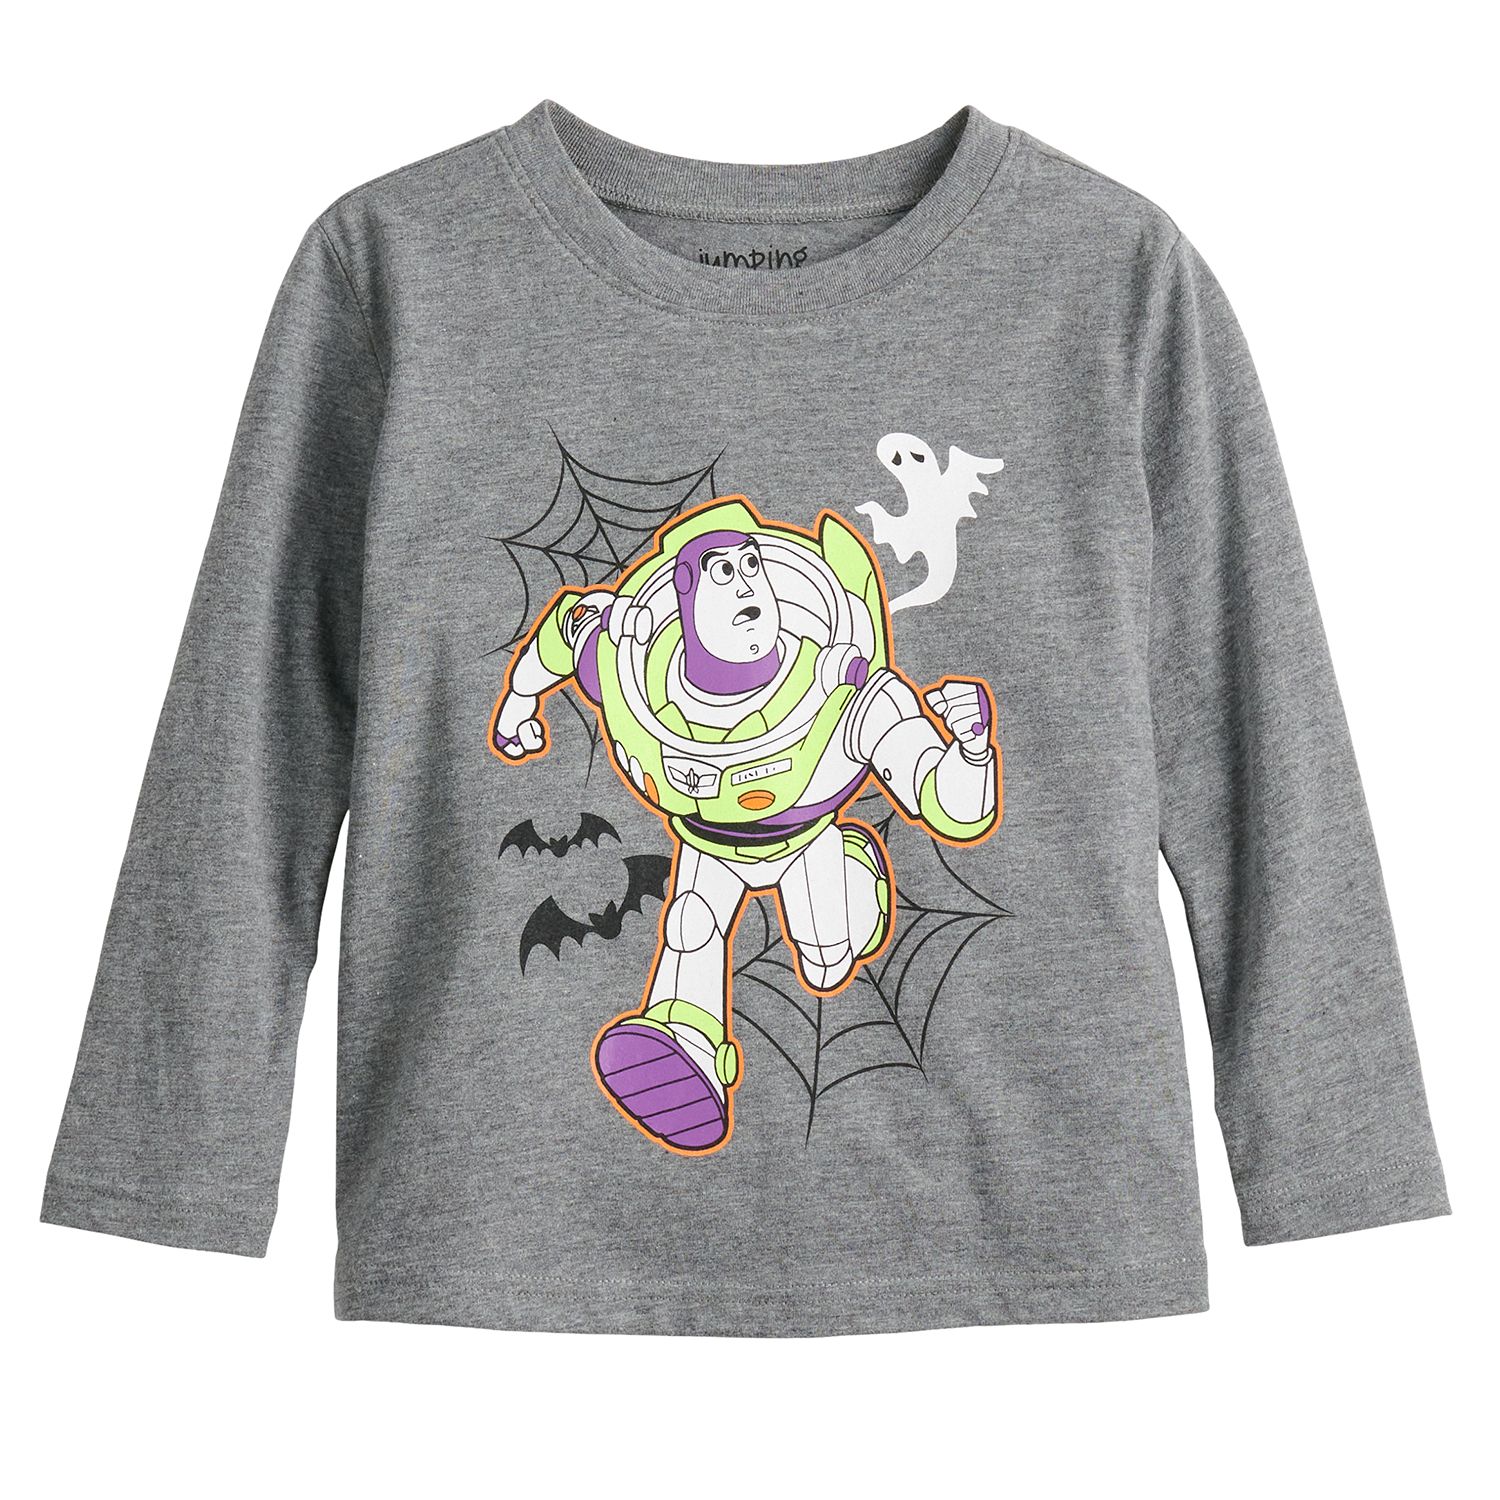 Image for Disney/Jumping Beans Disney / Pixar Toy Story Toddler Boy Buzz Lightyear Graphic Tee by Jumping Beans® at Kohl's.